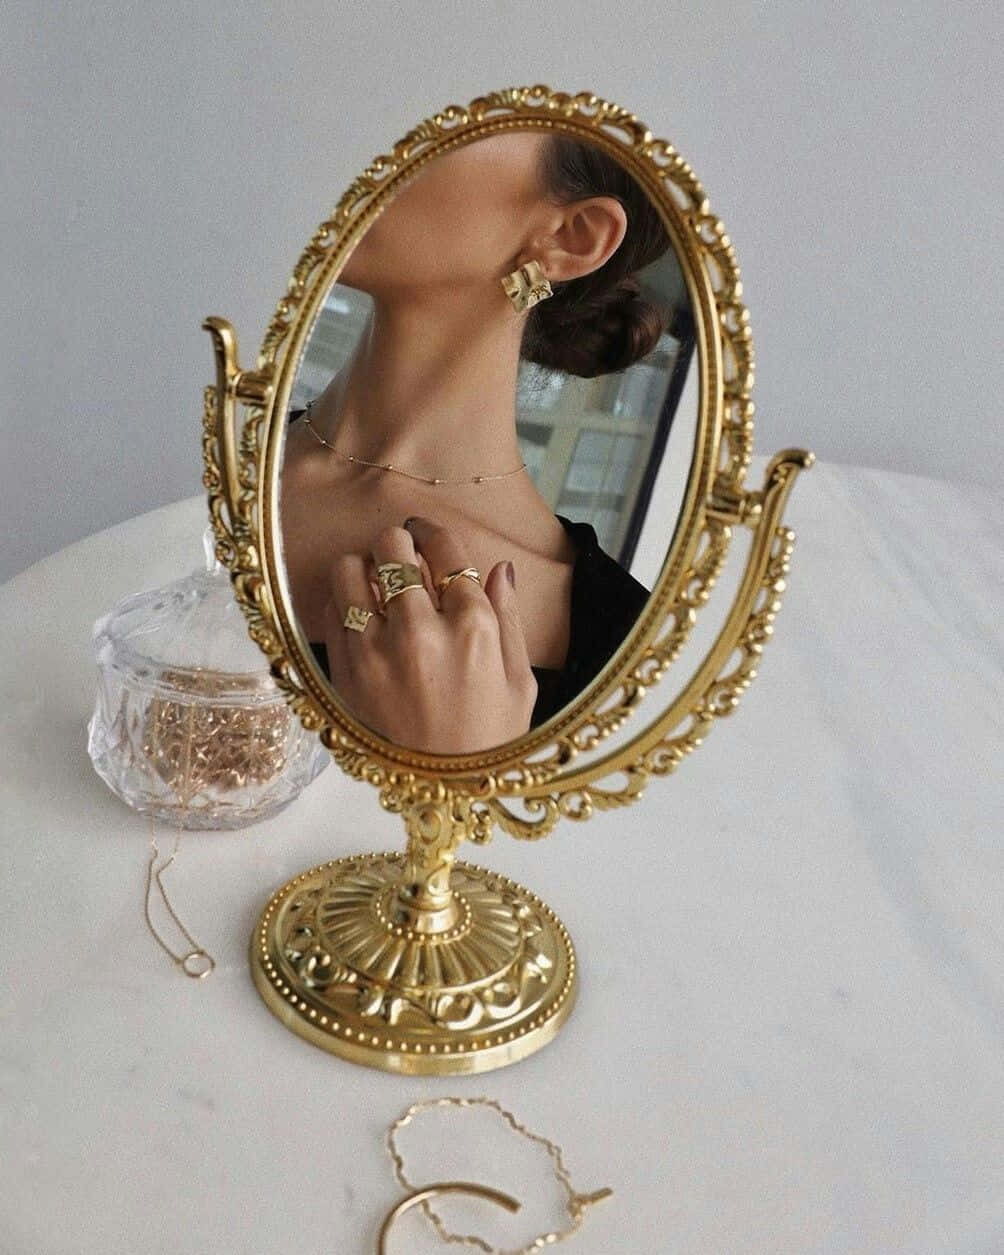 A Woman Is Holding A Gold Mirror And Jewelry Wallpaper